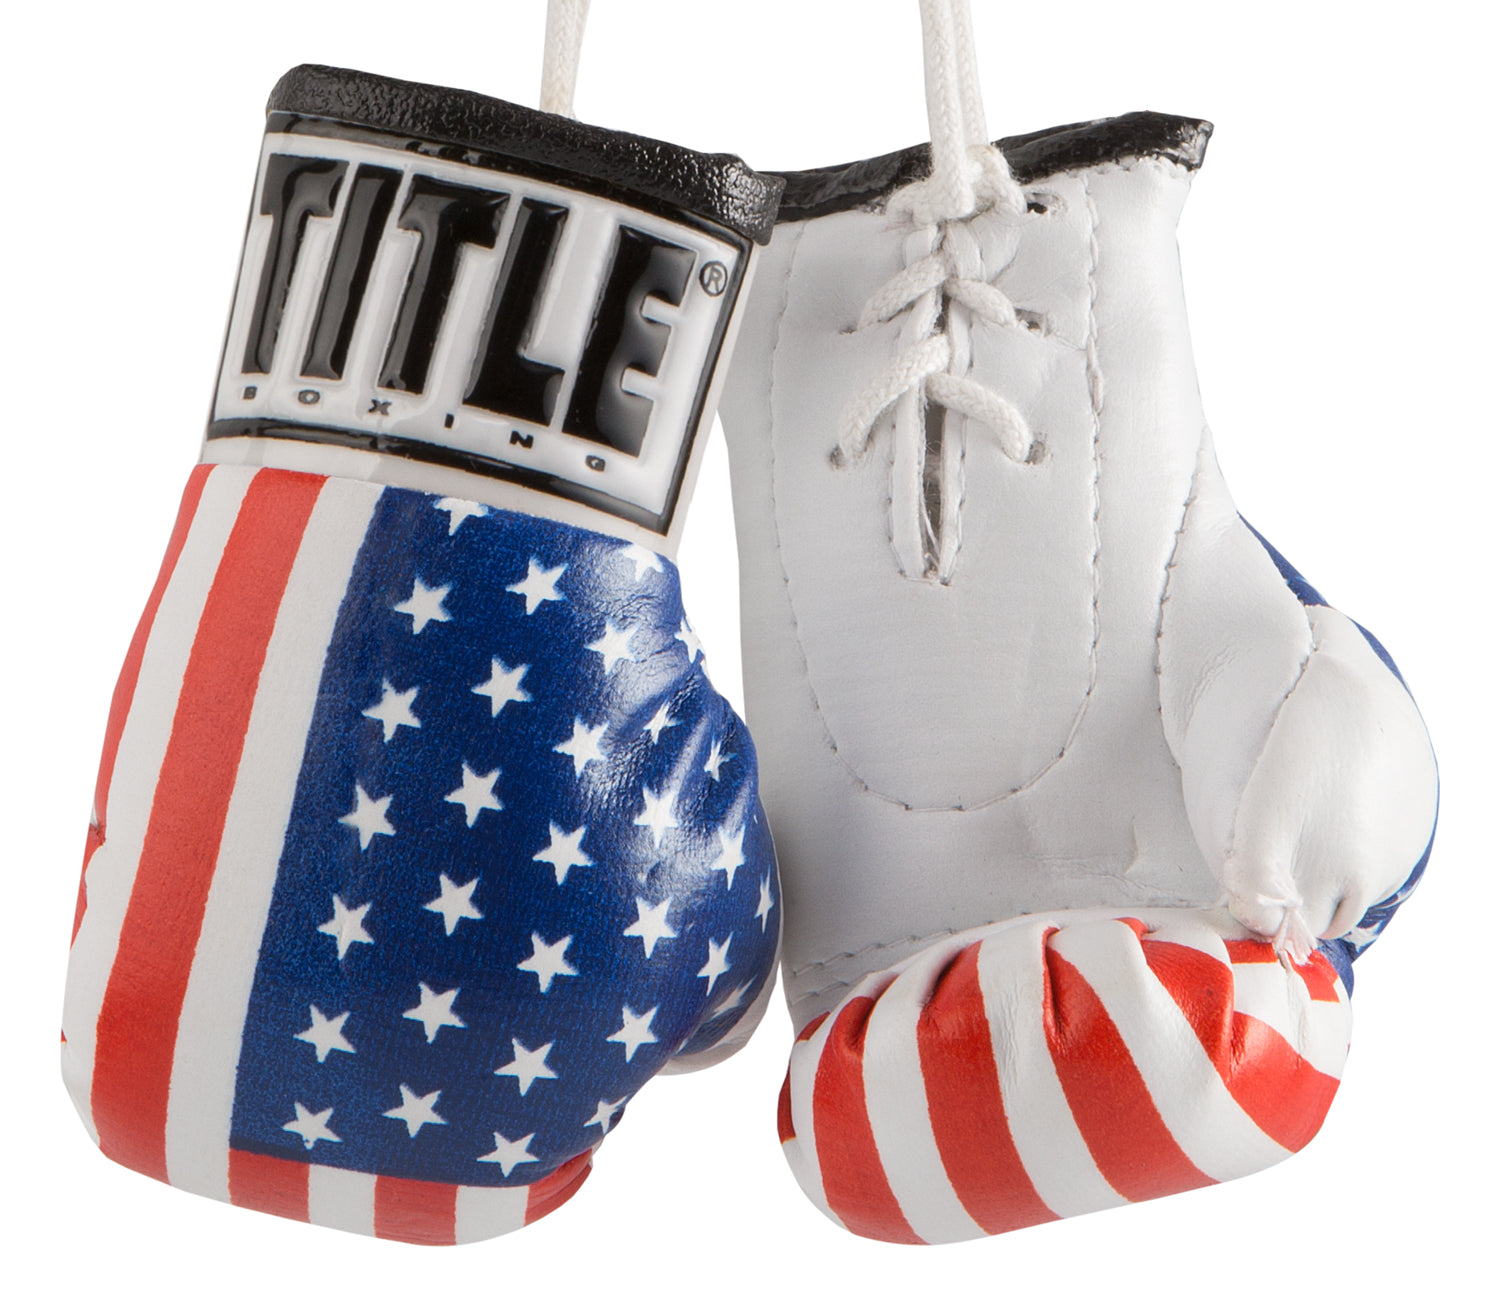 Special listing for 20 Mini boxing gloves 